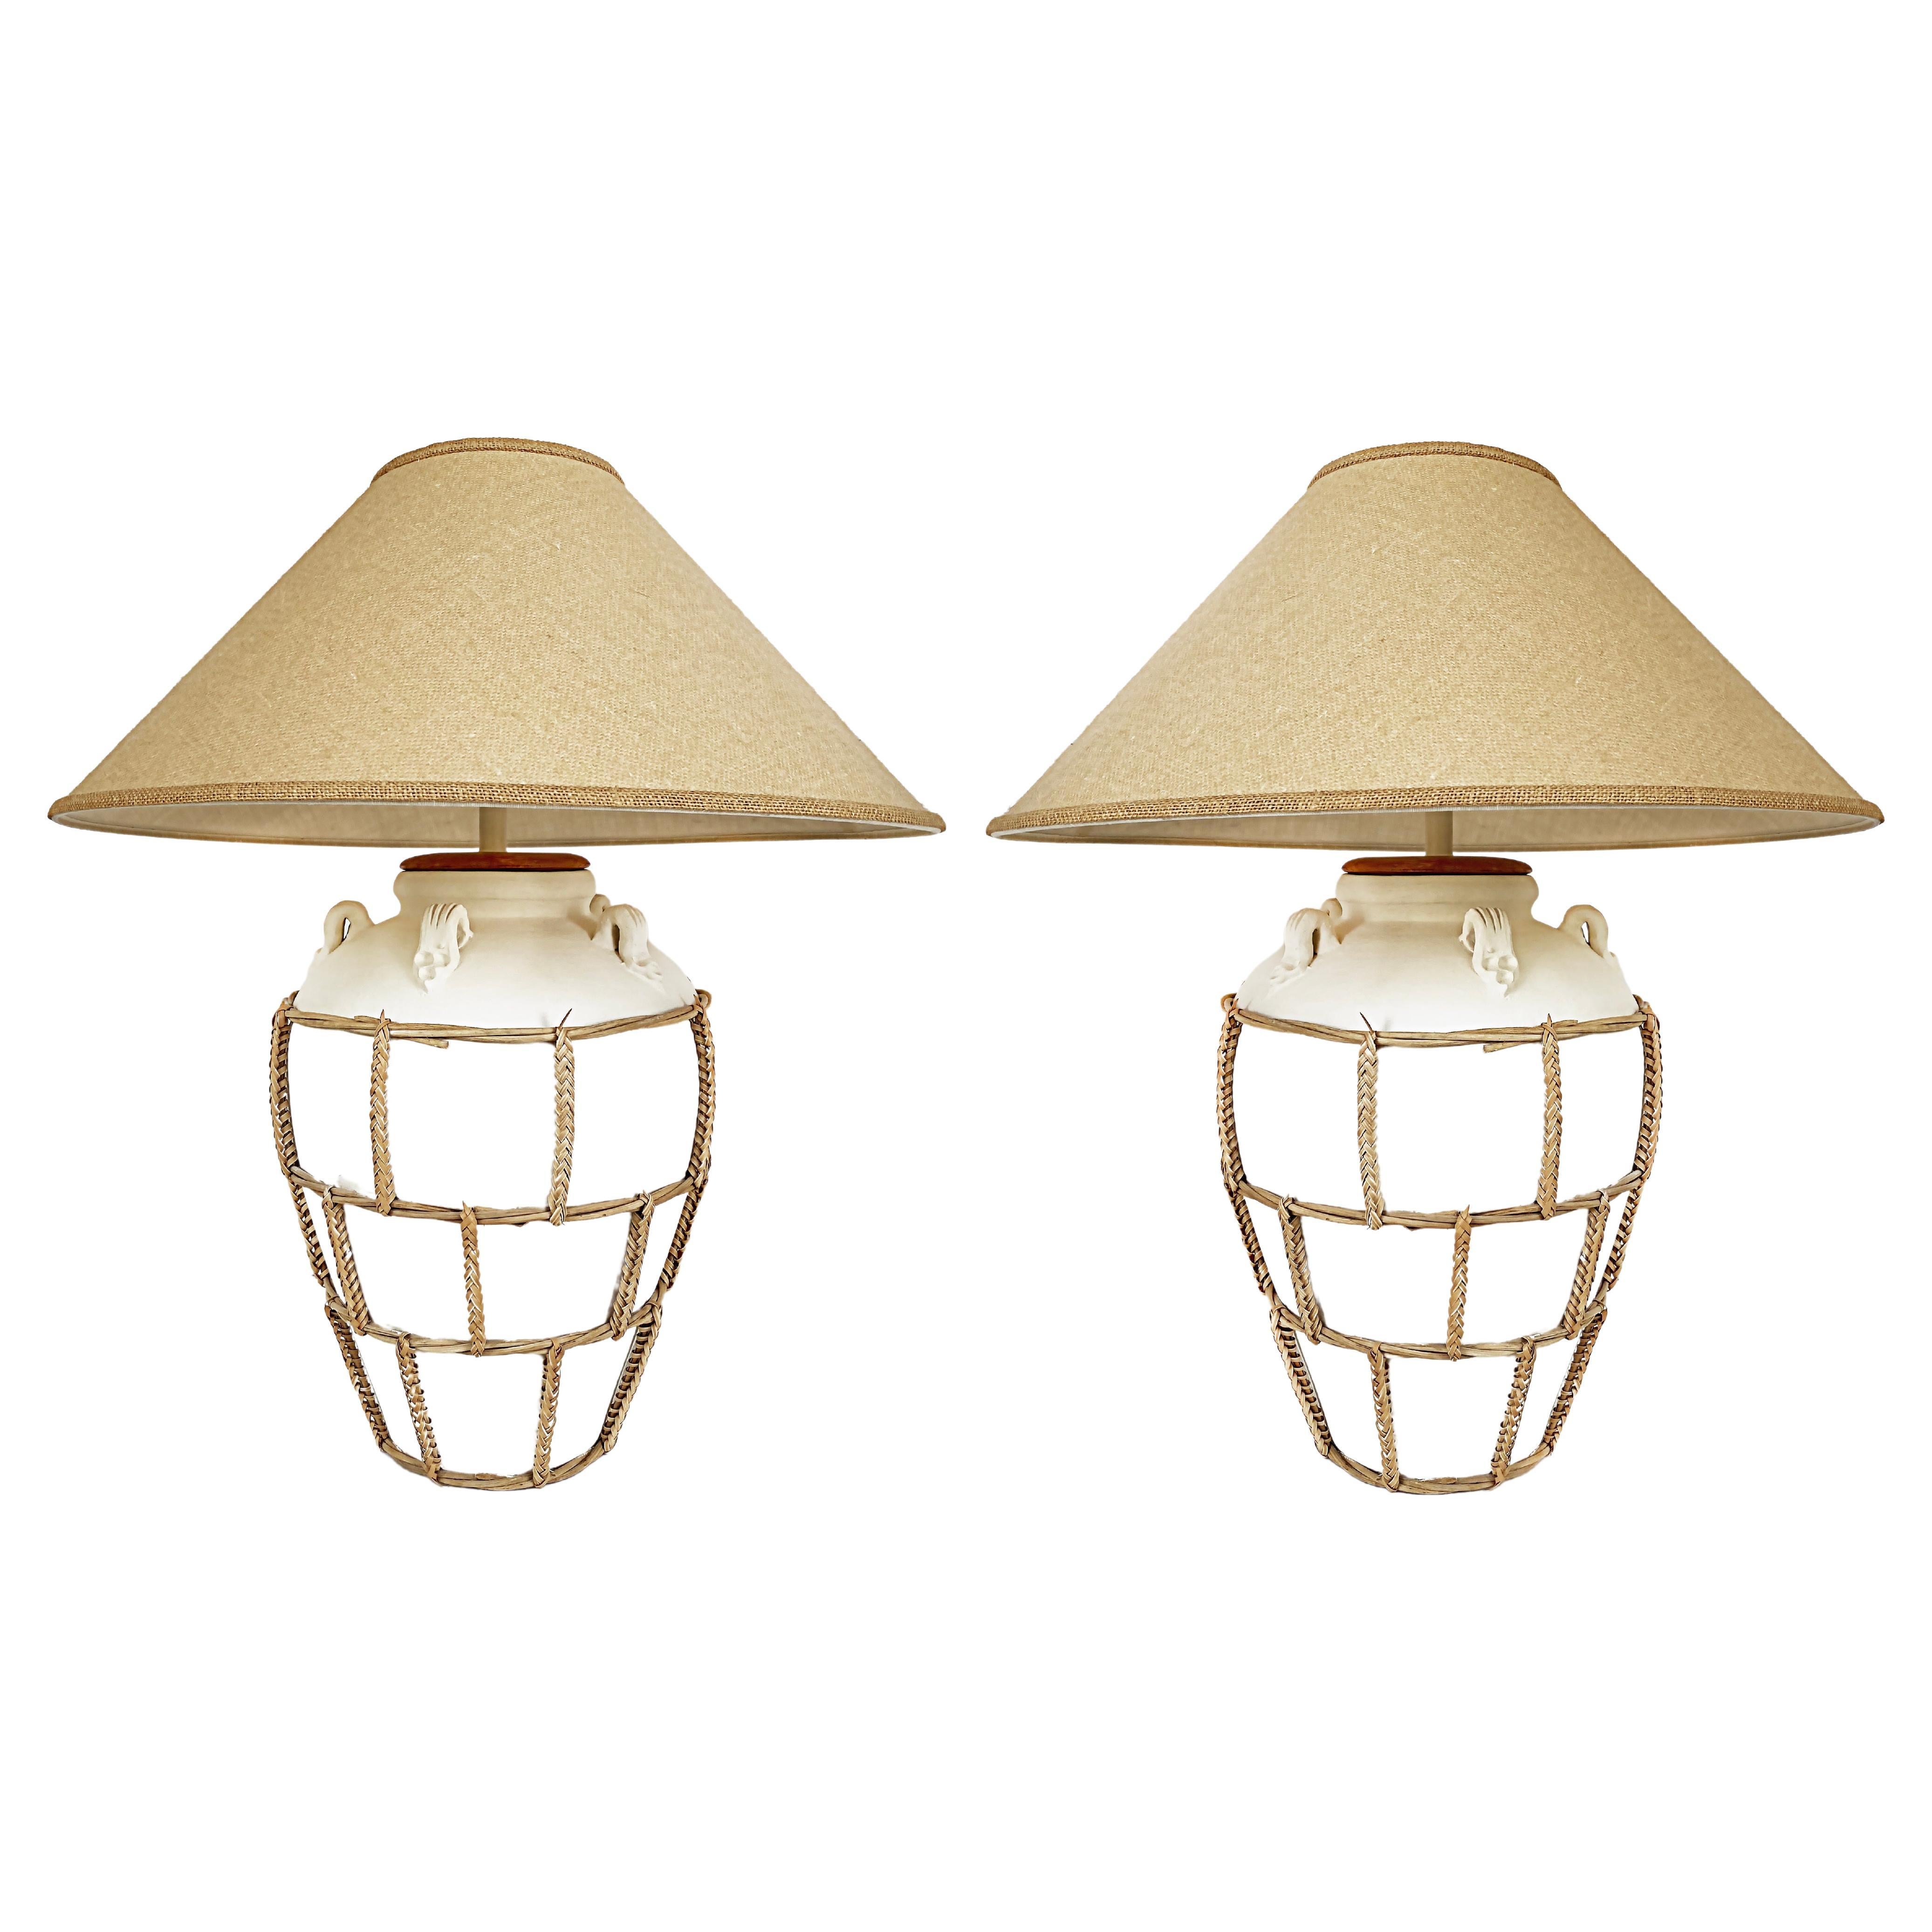 Ceramic Urn Mounted Lamps with Braided Reed, Burlap Shades